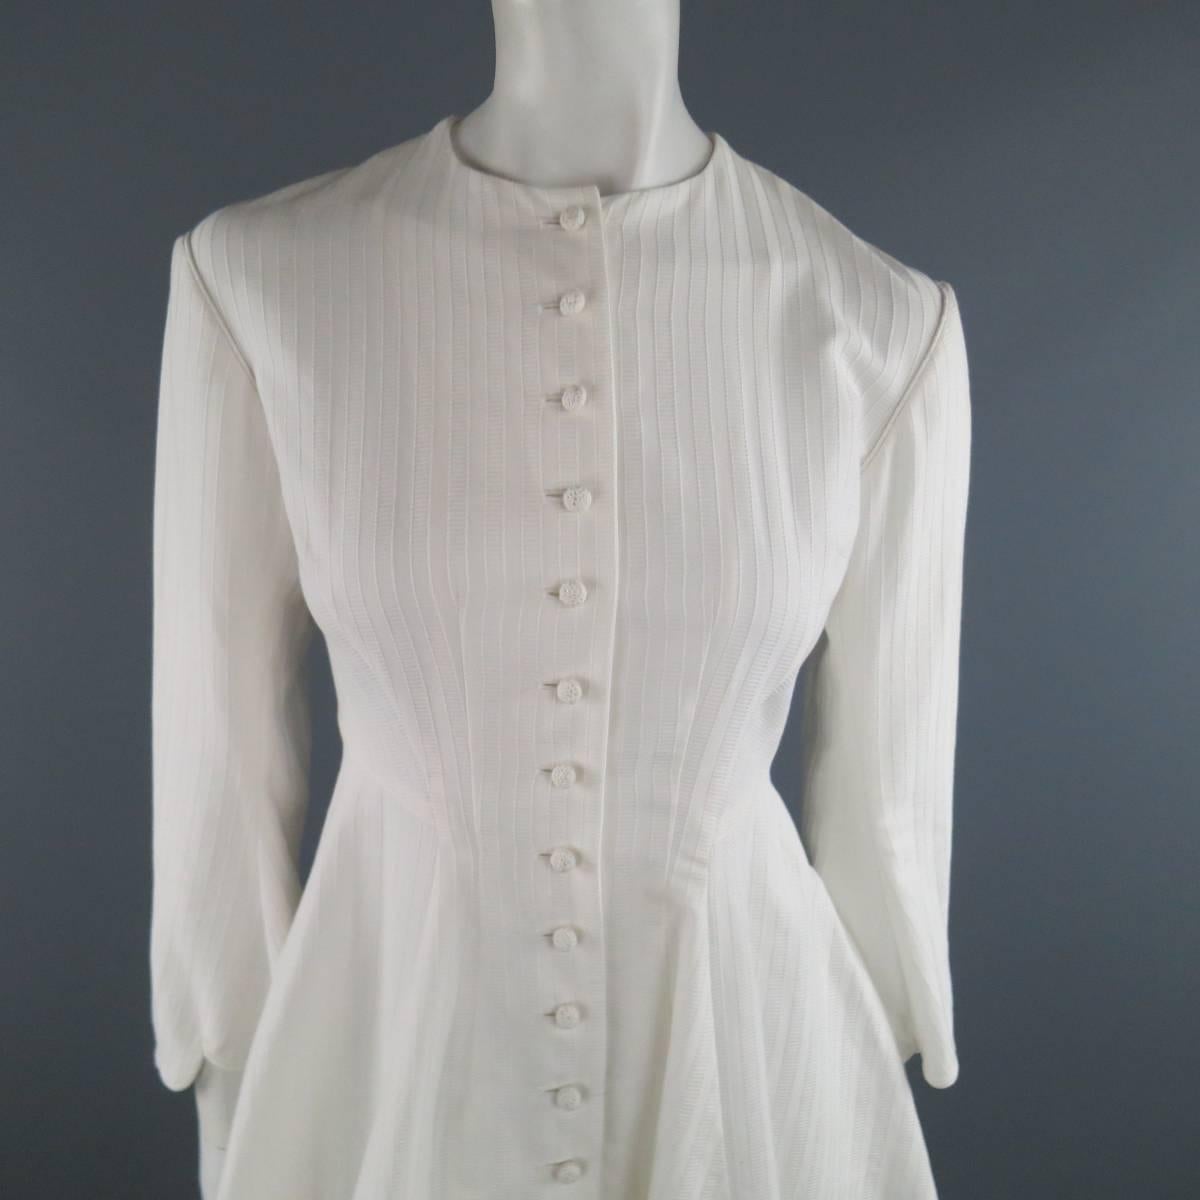 Ralph Lauren Collection shirt dress comes in white stripe textured cotton and features a round neckline, knit button closure, loose sleeves, cinch waist silhouette, and pleated skirt with high low scalloped hem. Made in USA.
 
New with Tags.
Marked: